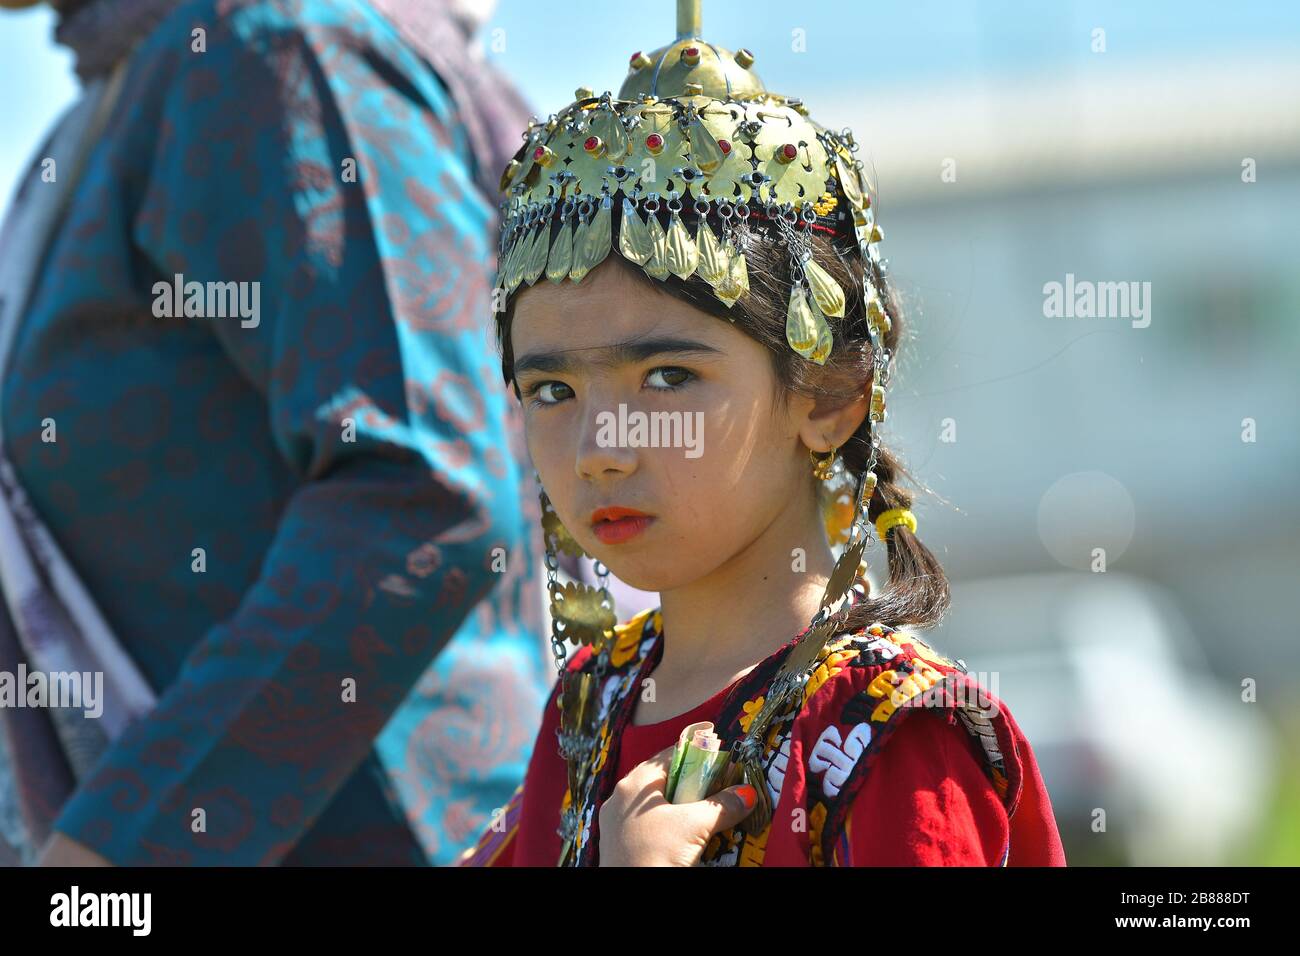 TURKMENISTAN, ASHGABAT - MAY 1, 2019: Day of turkmen racehorse. Public. Girl in a traditional clothes and head decoration. Stock Photo